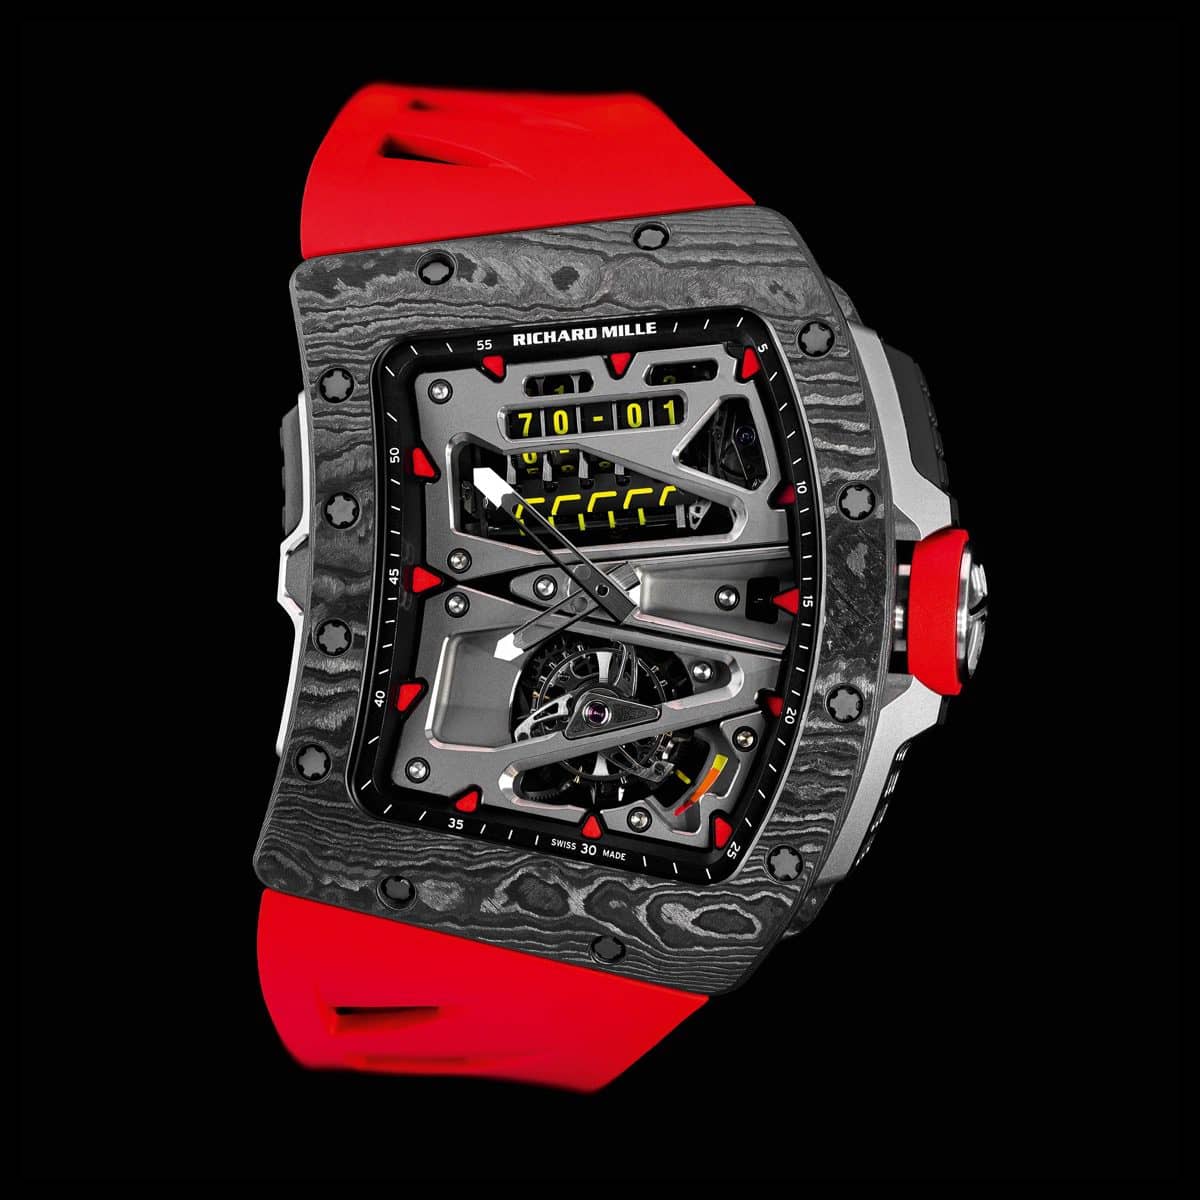 What Makes This Luxury Watch From Richard Mille So Insanely Expensive?